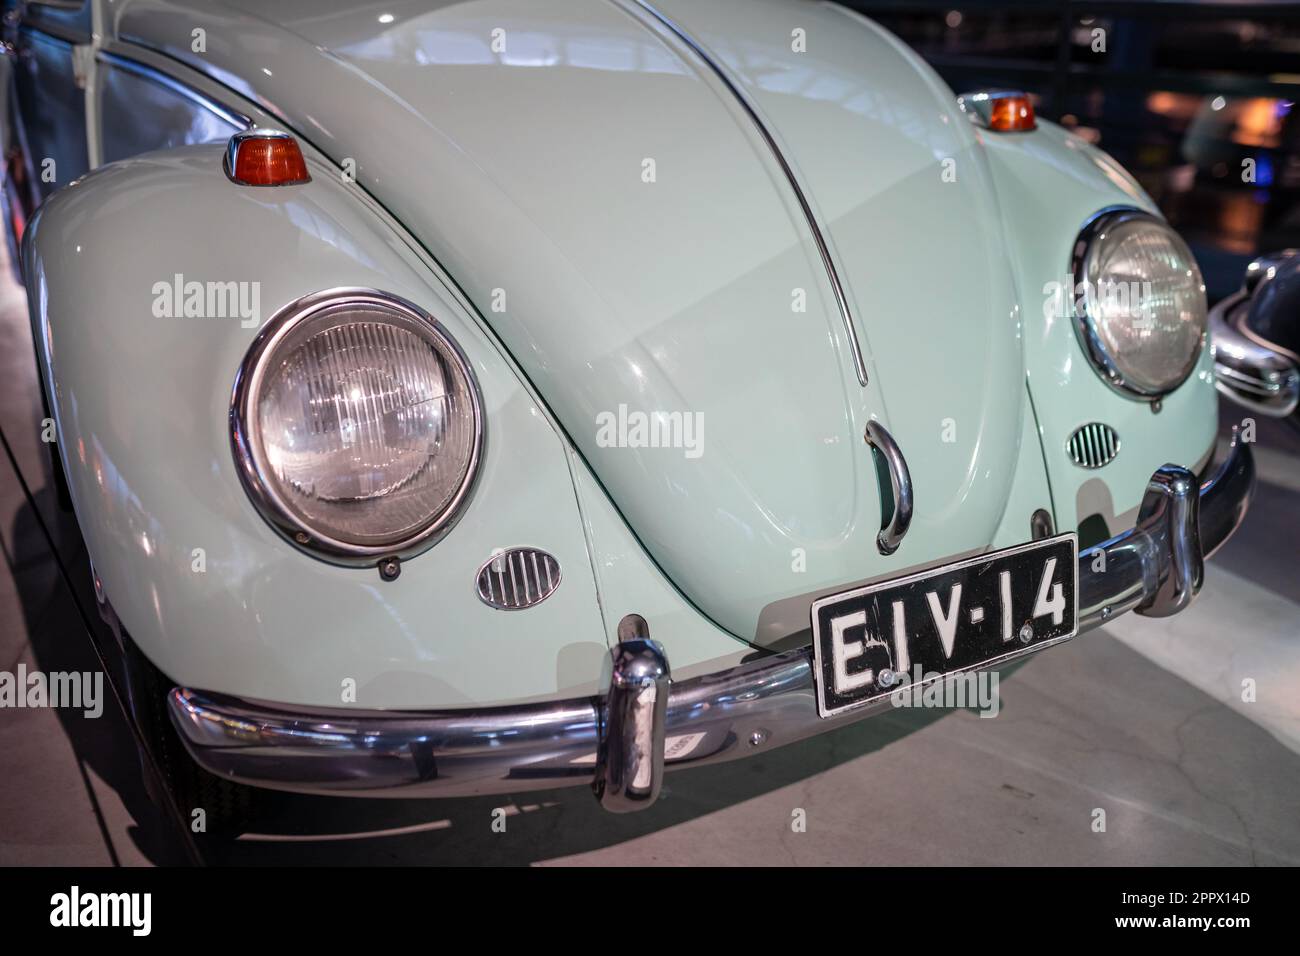 1966 Volkswagen 1300 Beetle in the Riga Motor Museum. Front close-up. Riga, Latvia - March 12, 2023 Stock Photo